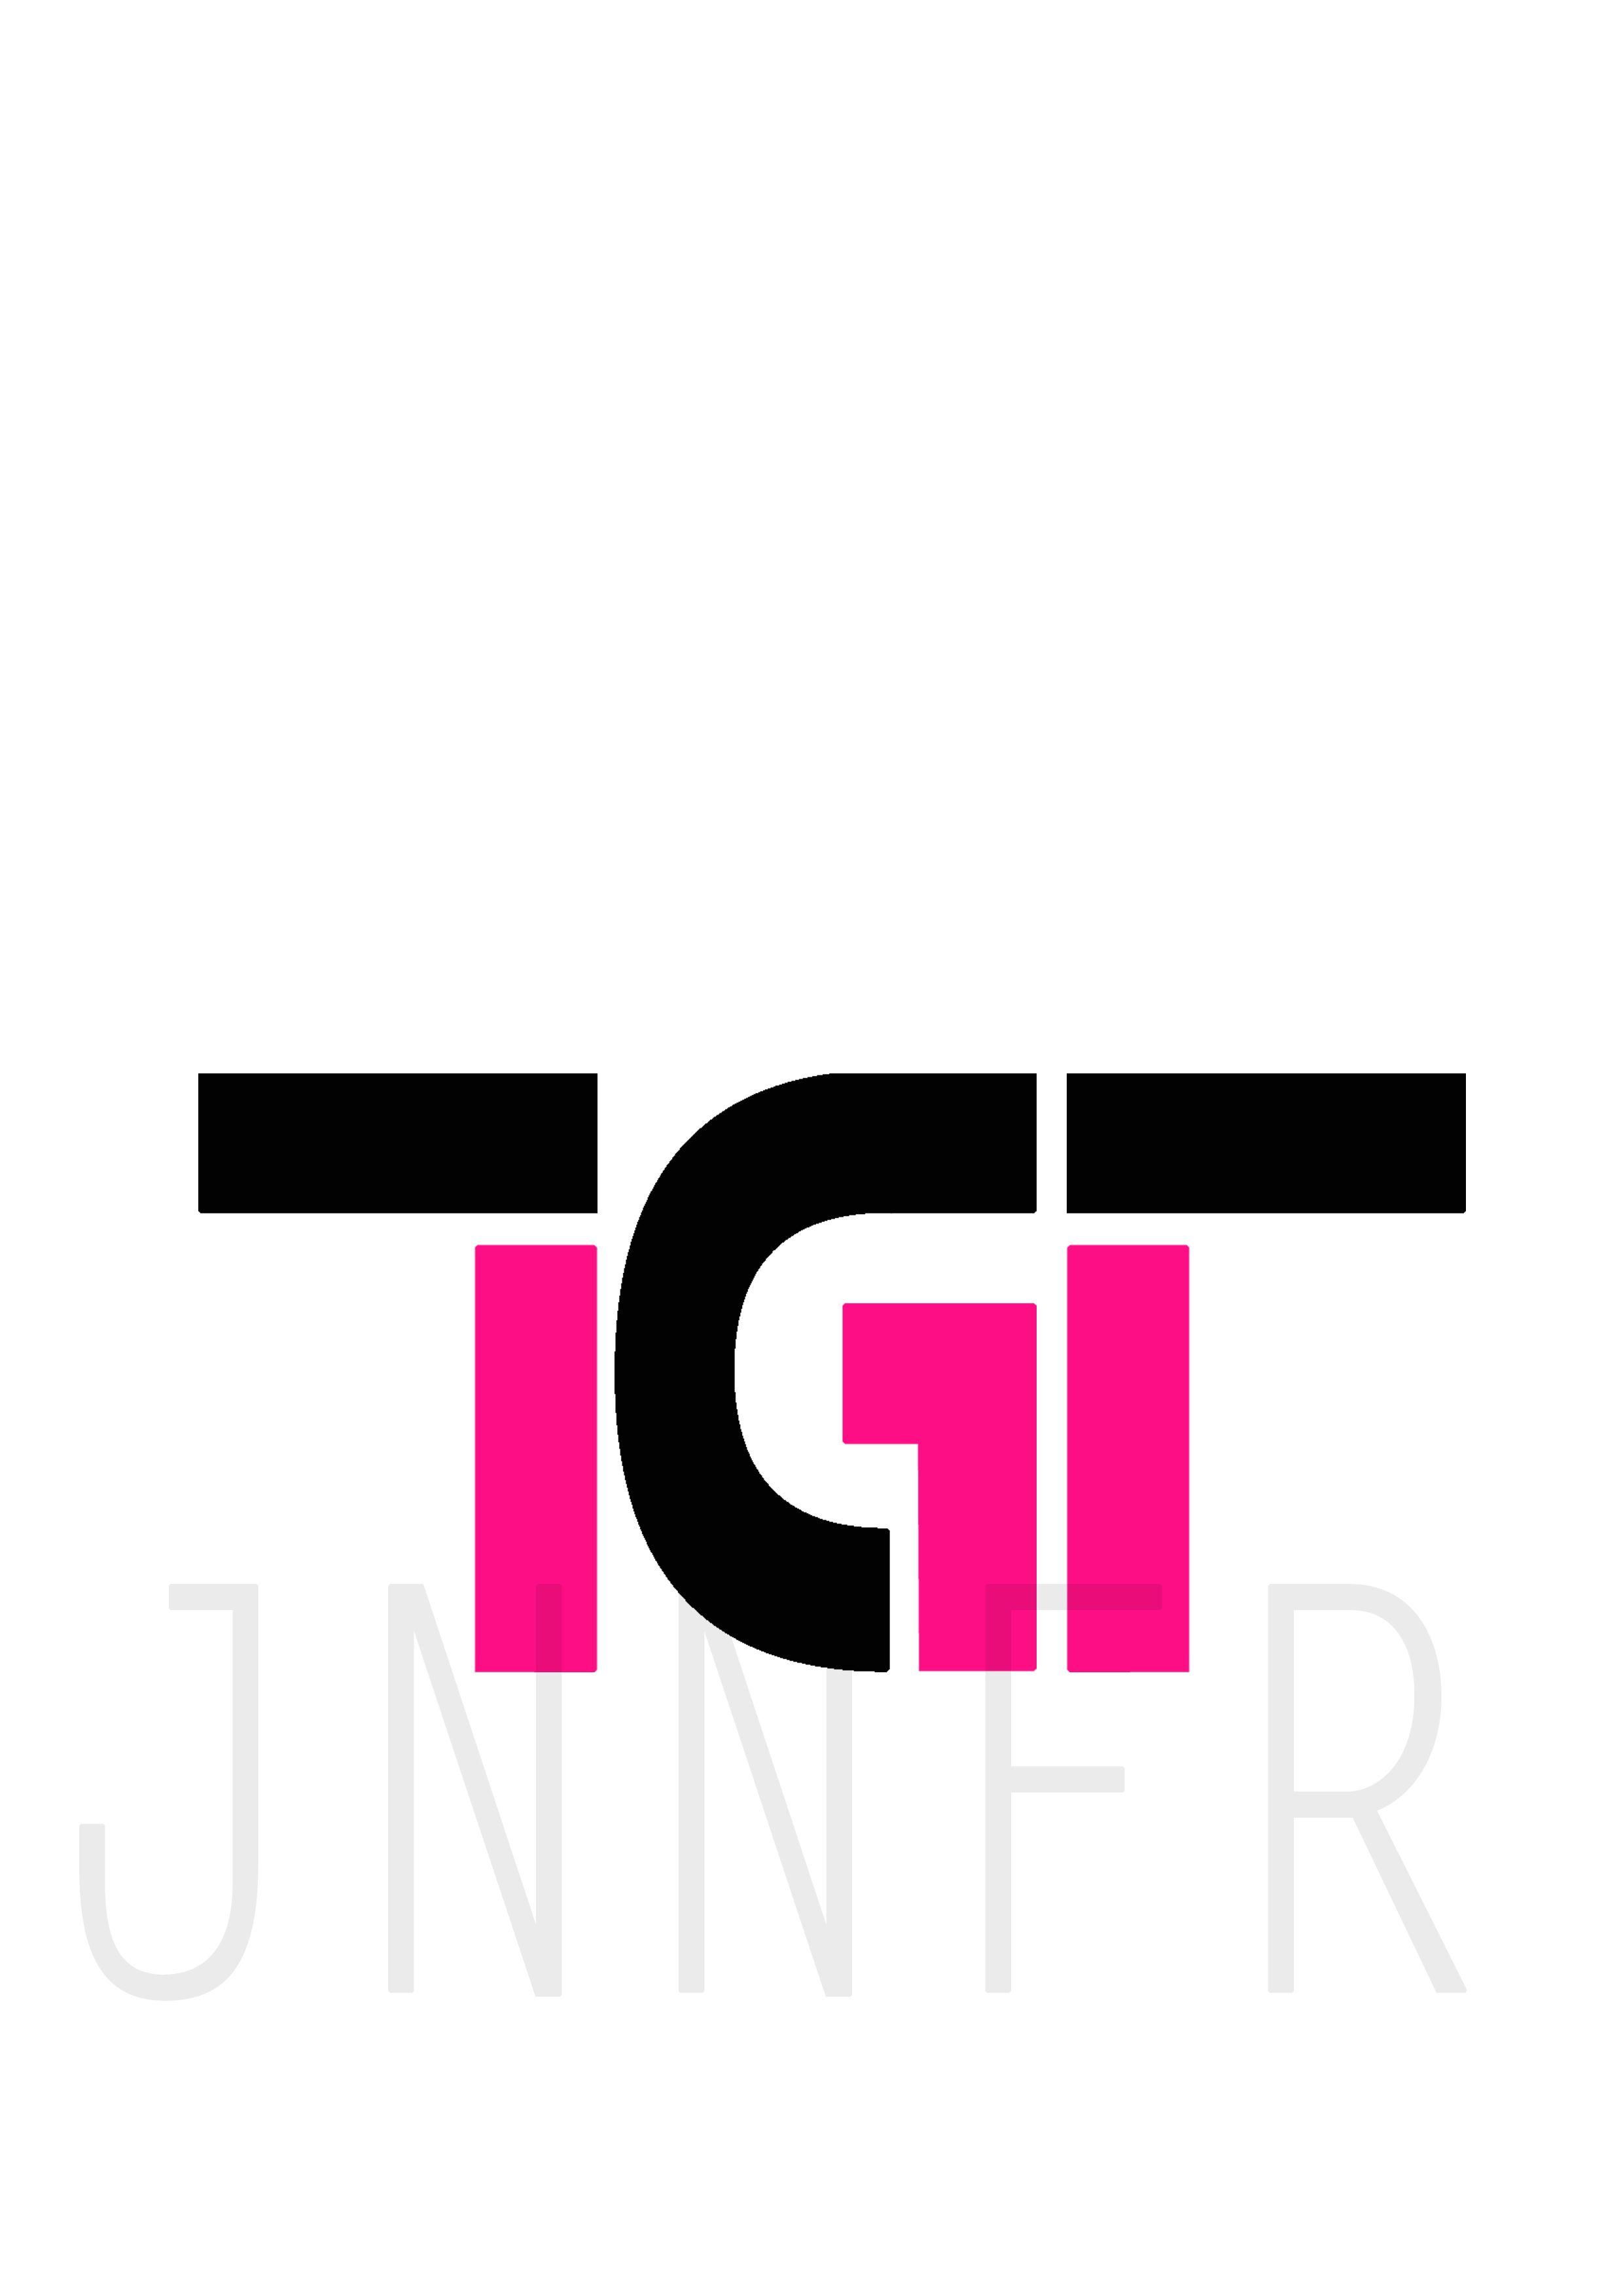 TGT Logo - New logo for Tryna Get There!